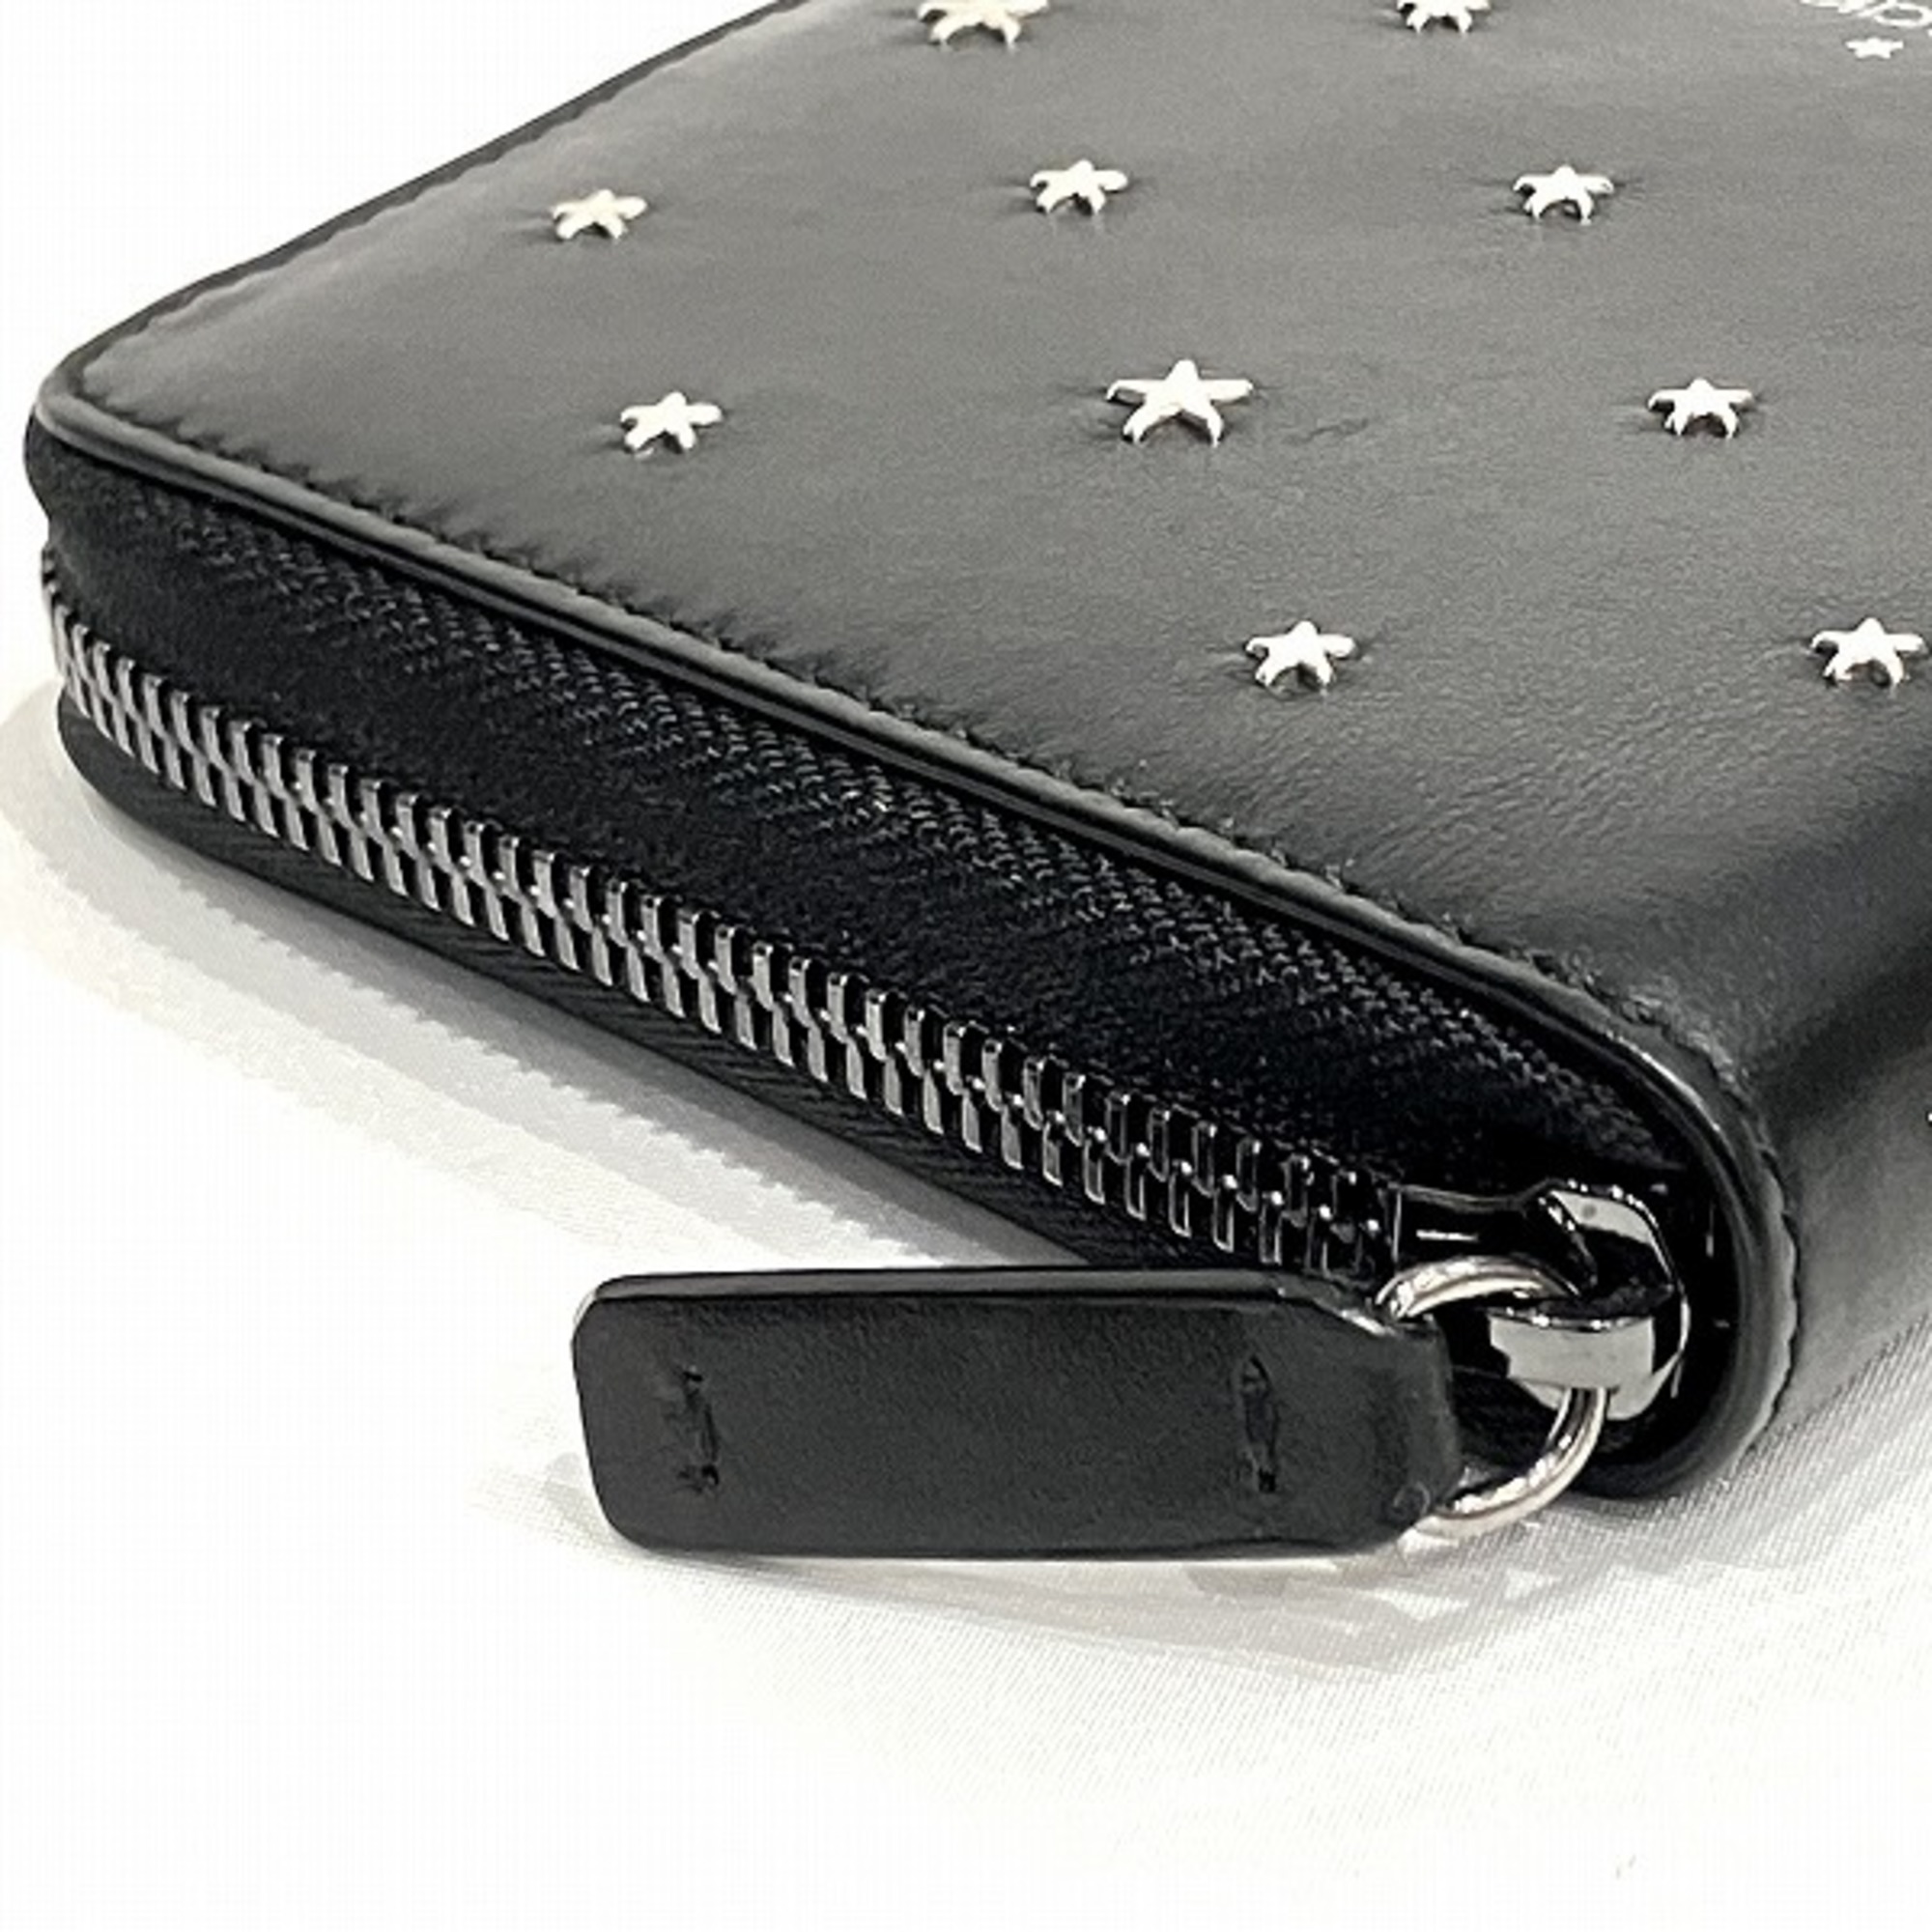 Luxurious Black Leather Coin Purse for Women - Sleek and Practical Accessory